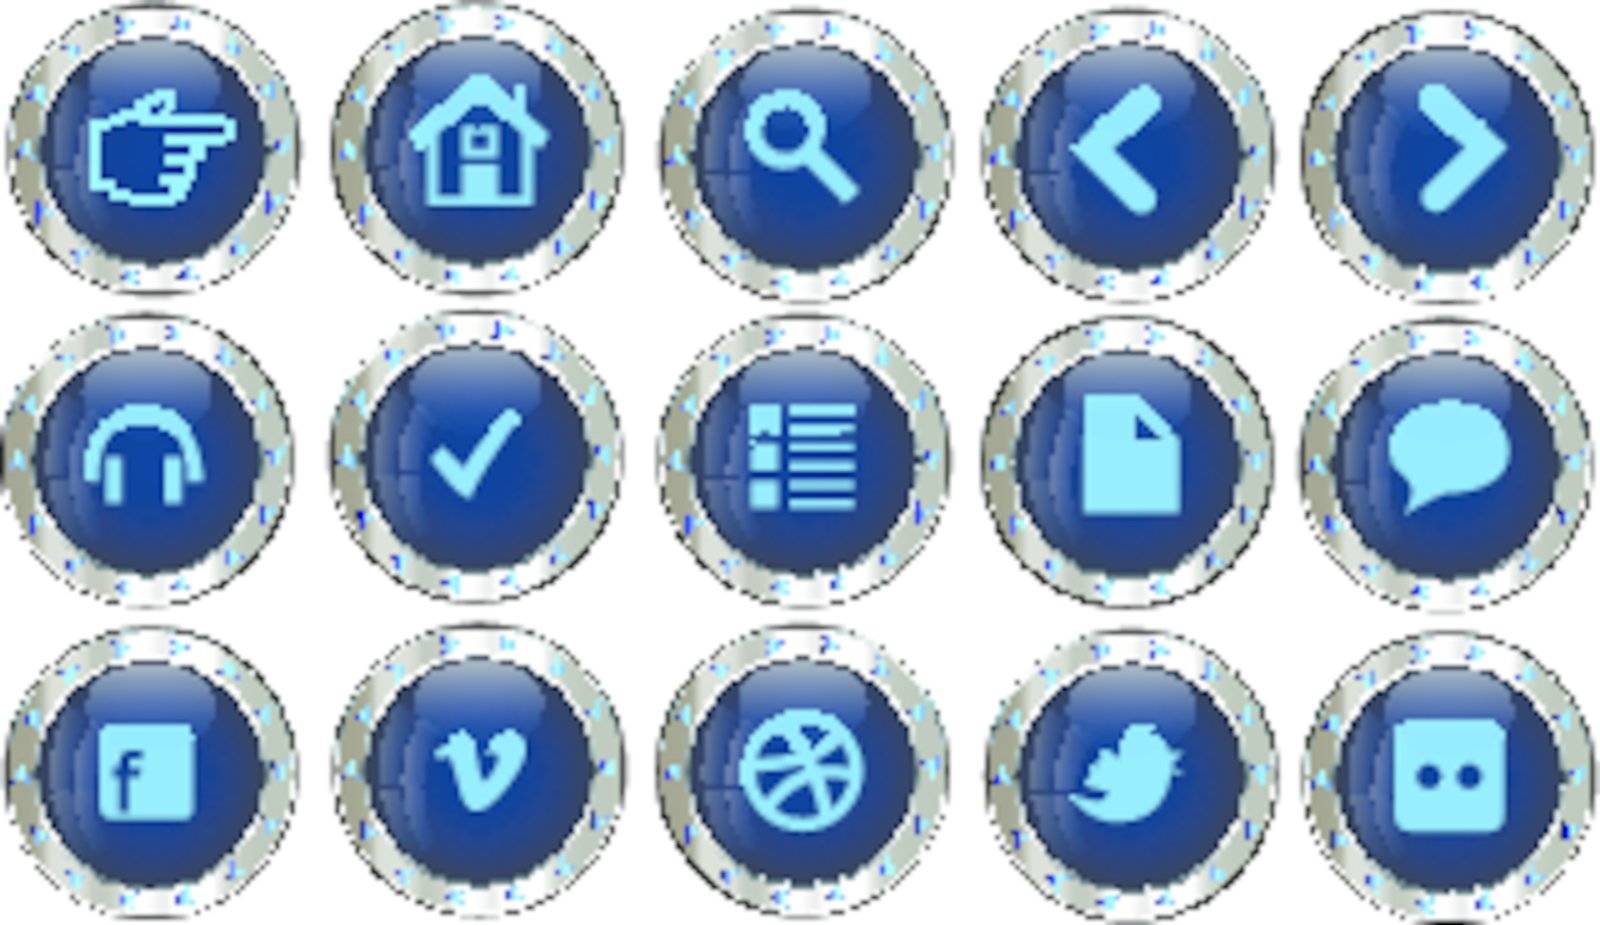 Silver web site icons by Mysteriousman